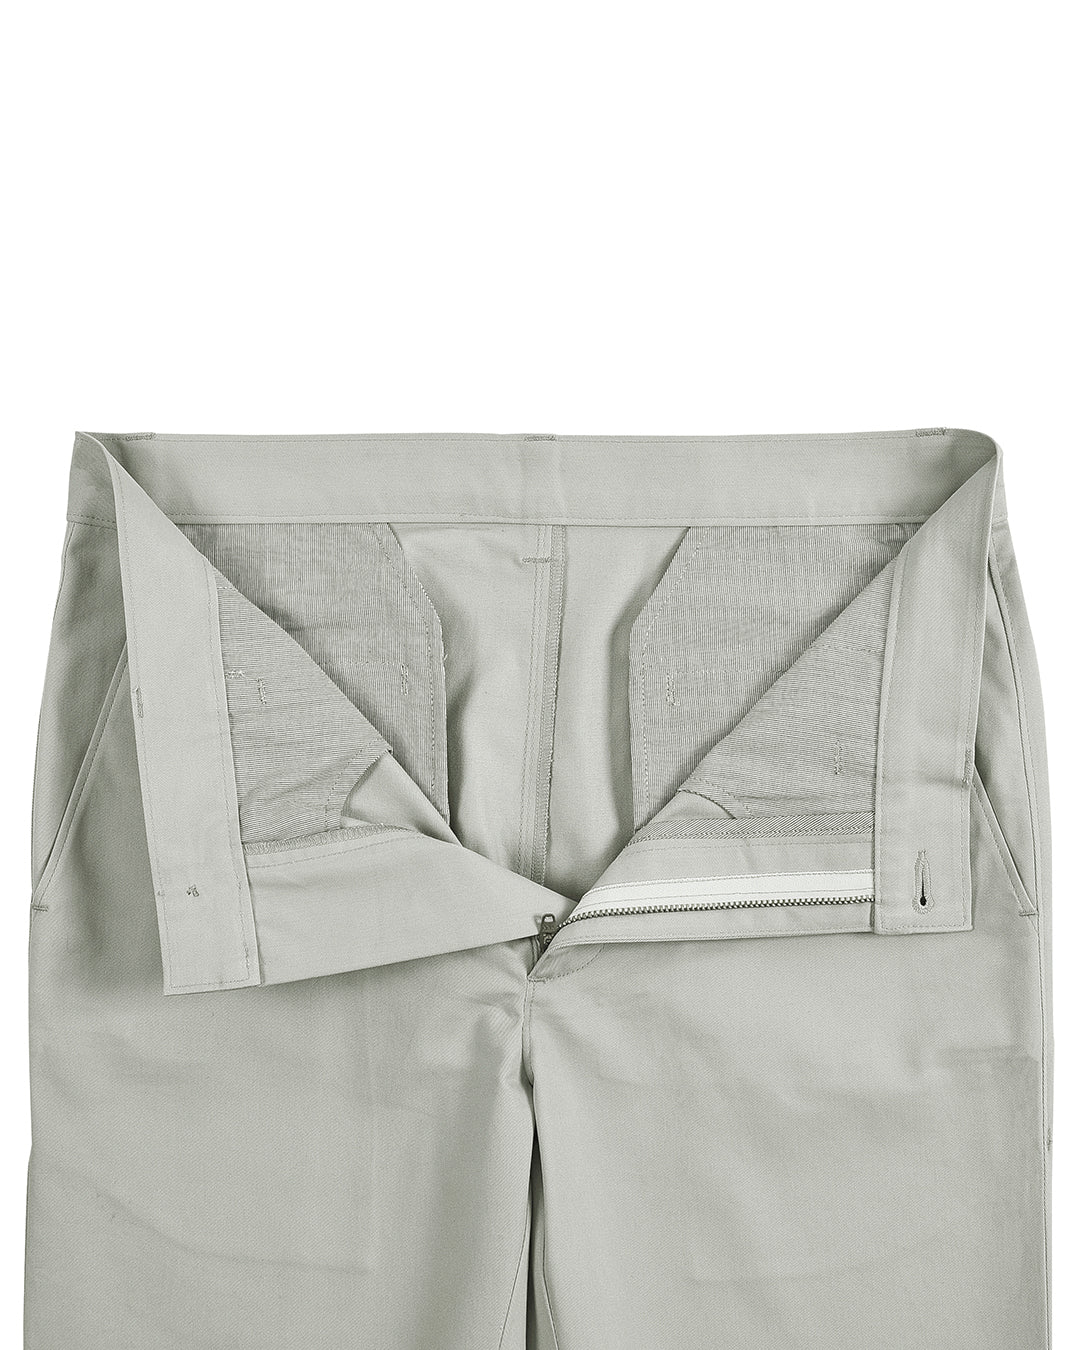 Front open view of custom Genoa Chino pants for men by Luxire in pale green